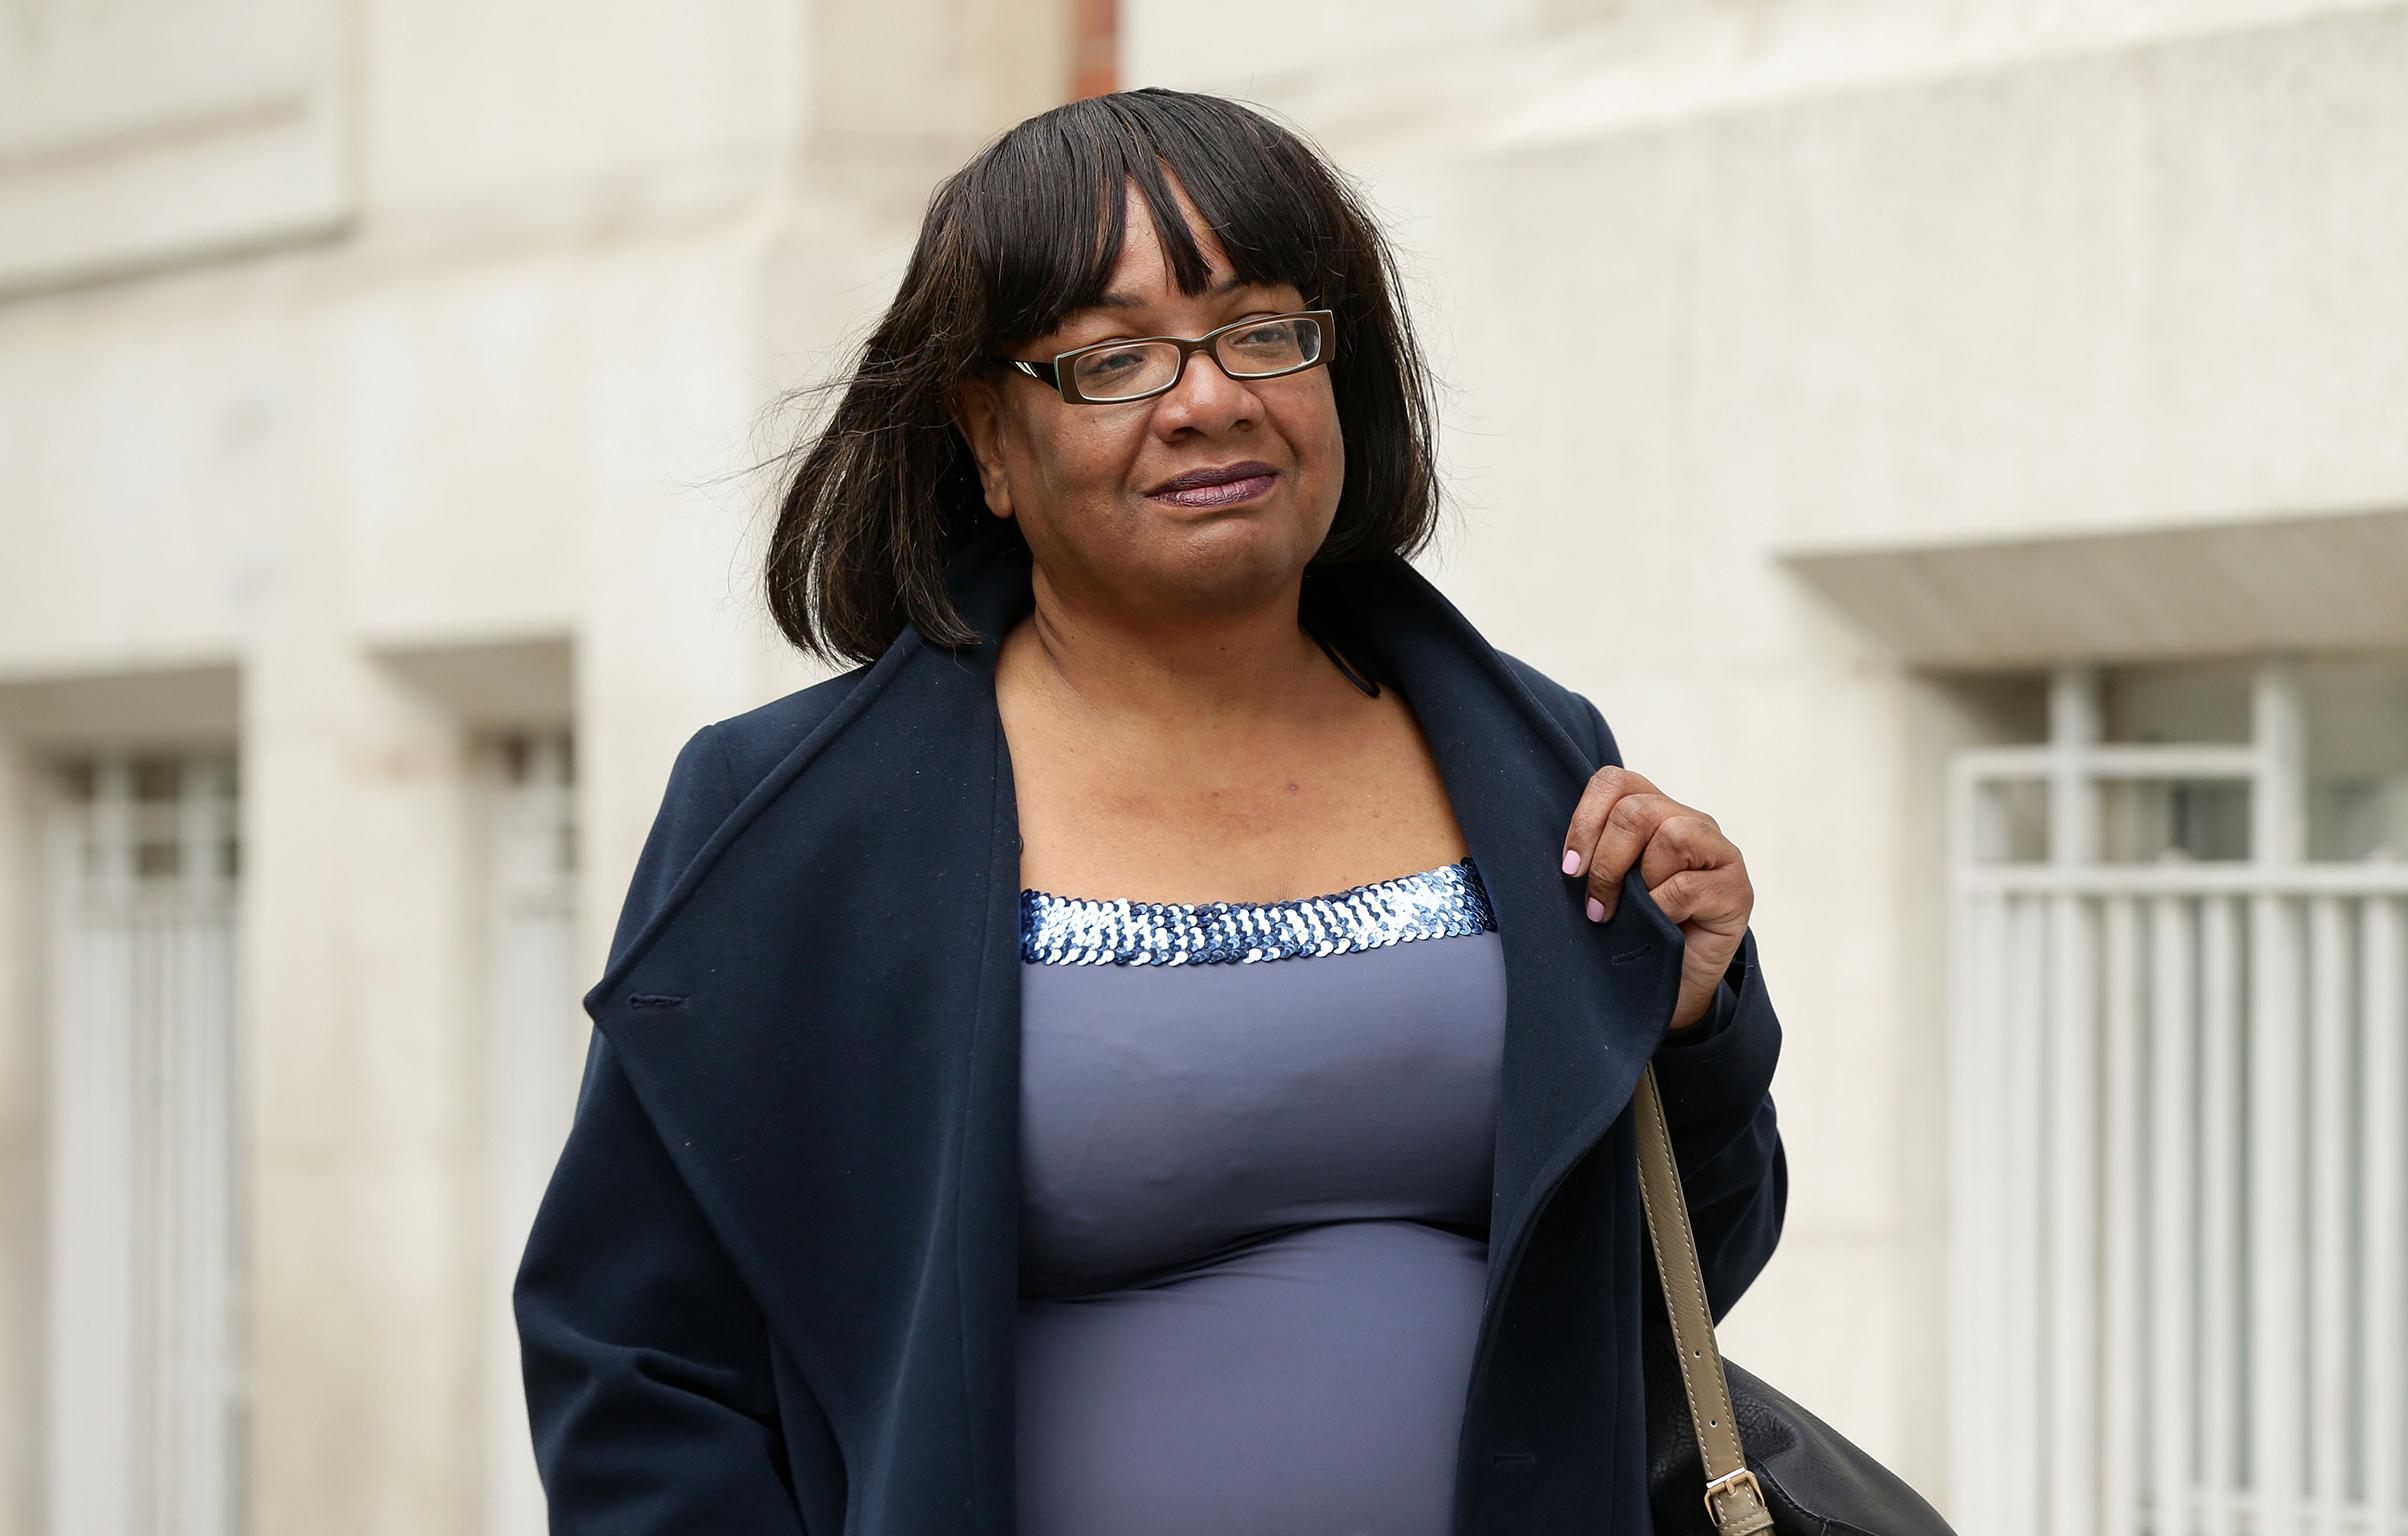 Dianne Abbott told the Committee of the racist and misogynistic abuse she receives on a daily basis